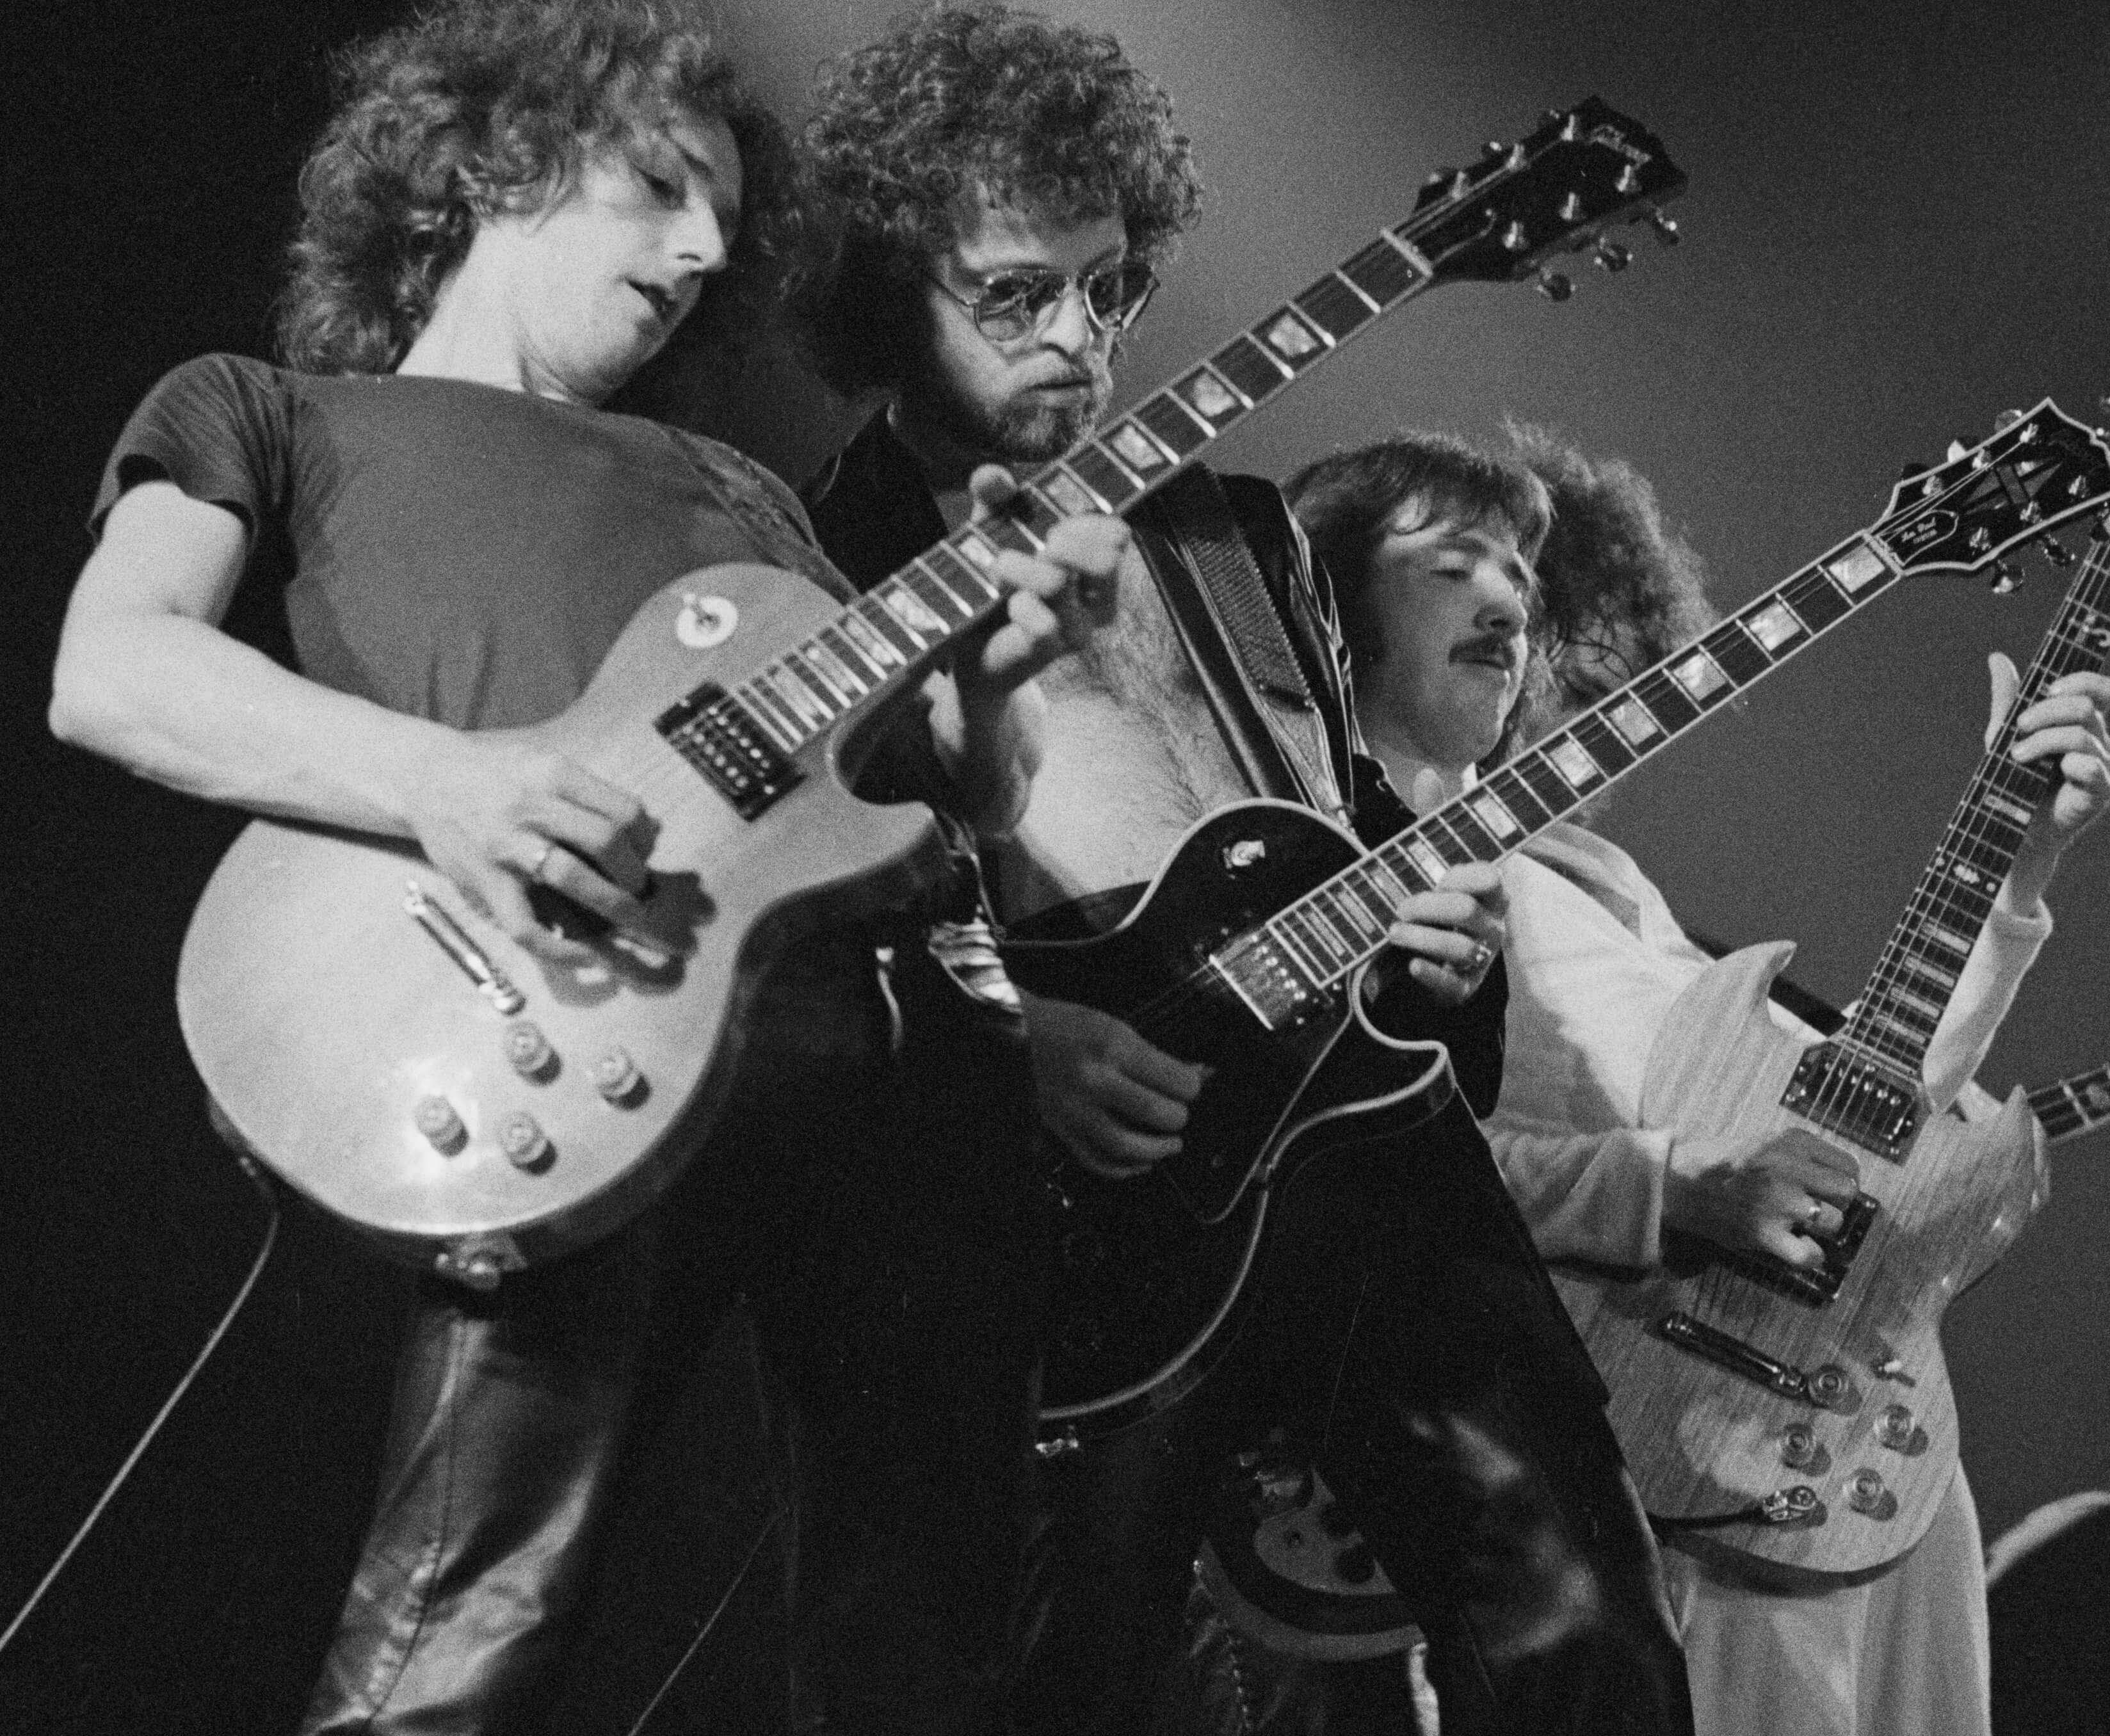 Blue Öyster Cult with guitars during the "(Don't Fear) The Reaper" era